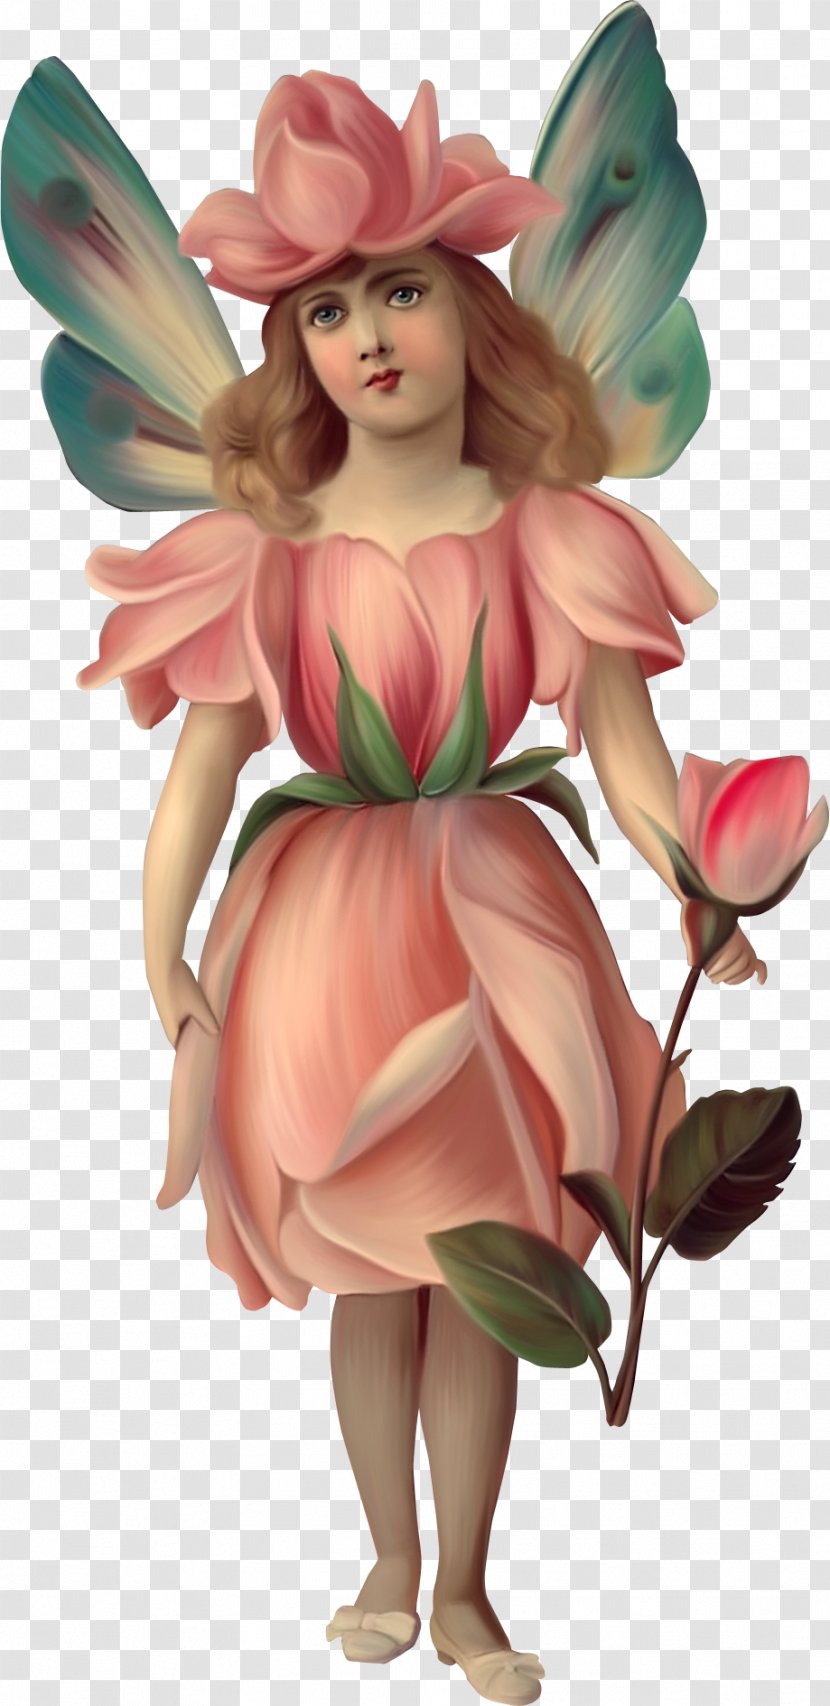 Fairy Angel Flower Fairies - Mythical Creature - Elf Transparent PNG